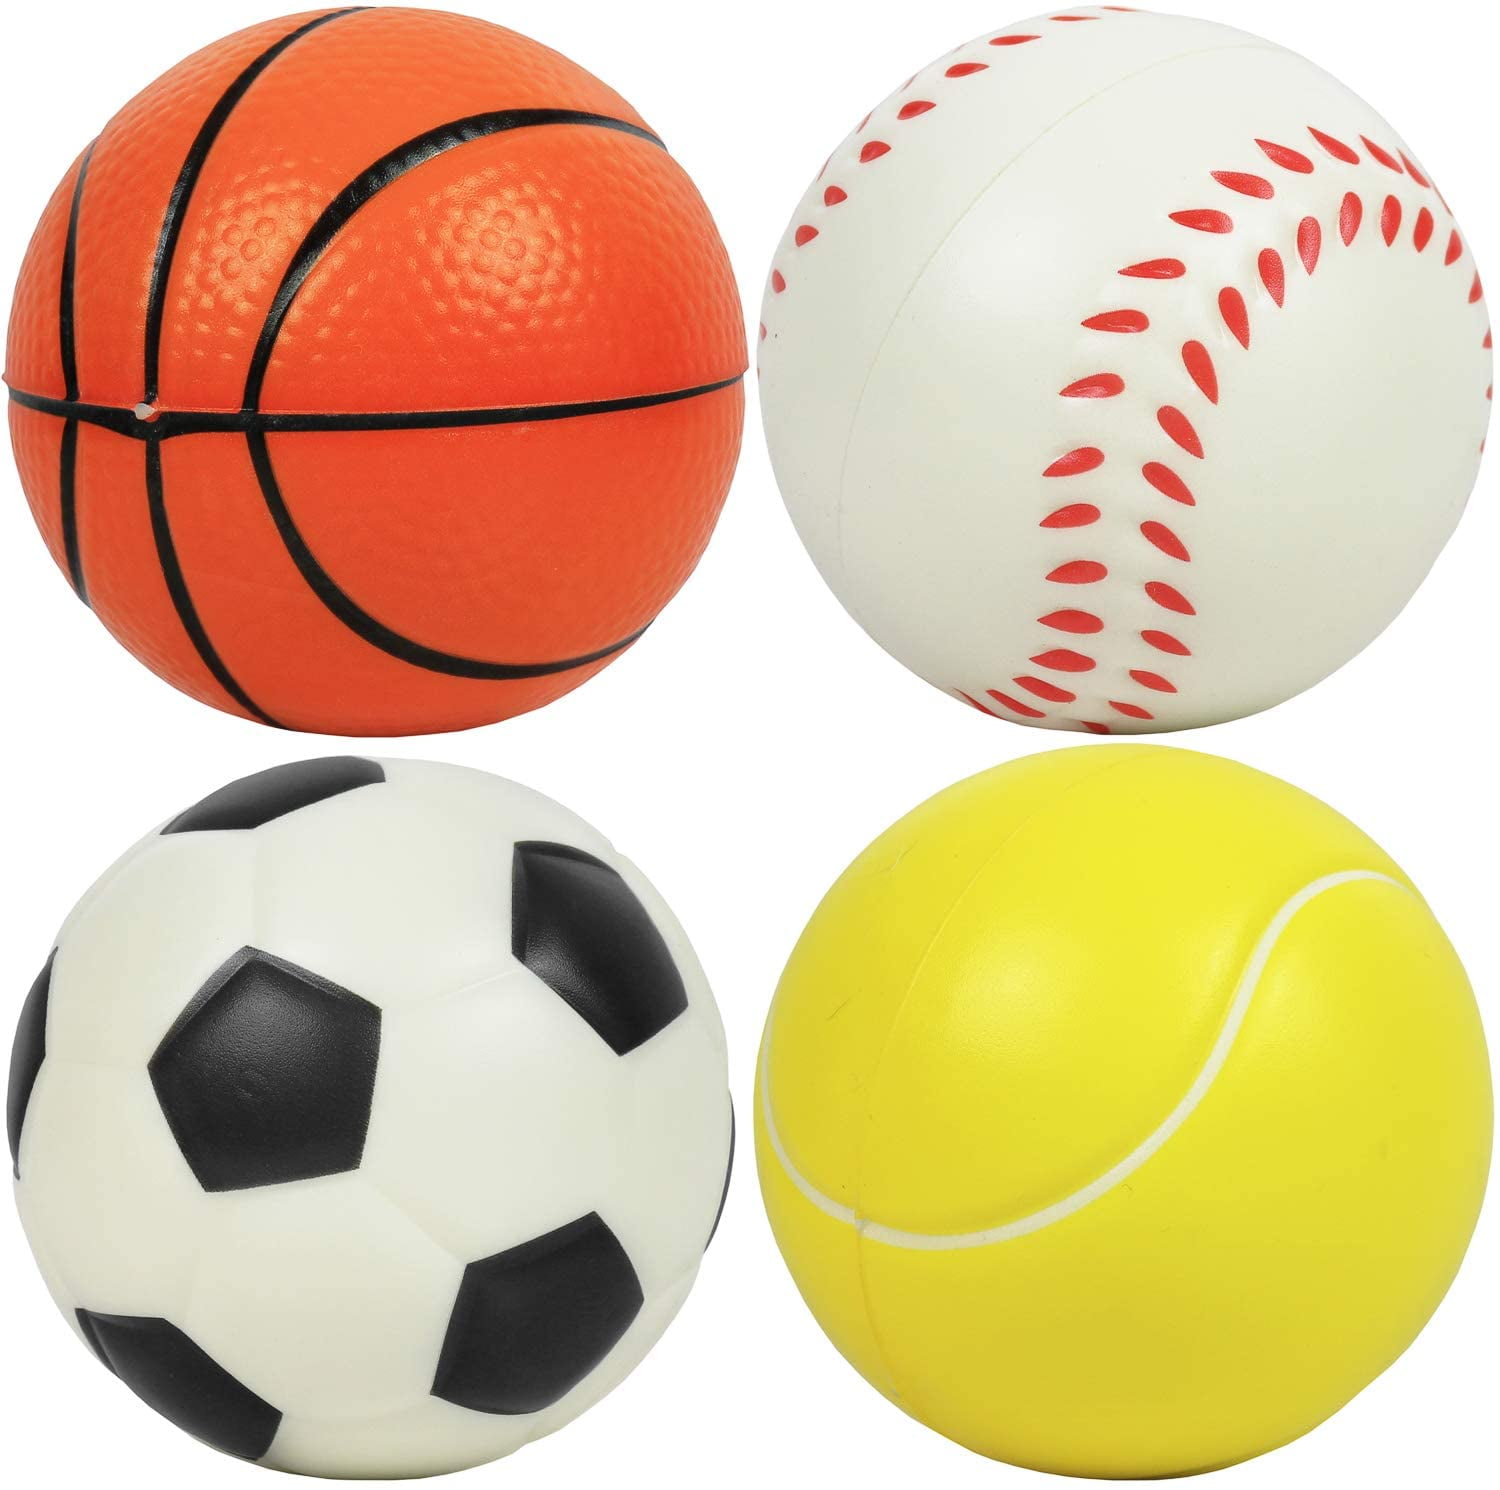 CHILDRENS PLAYING THROW & CATCH FOAM BALL SOFT RUBBER SPONGE OUTDOOR PLAYBALL 